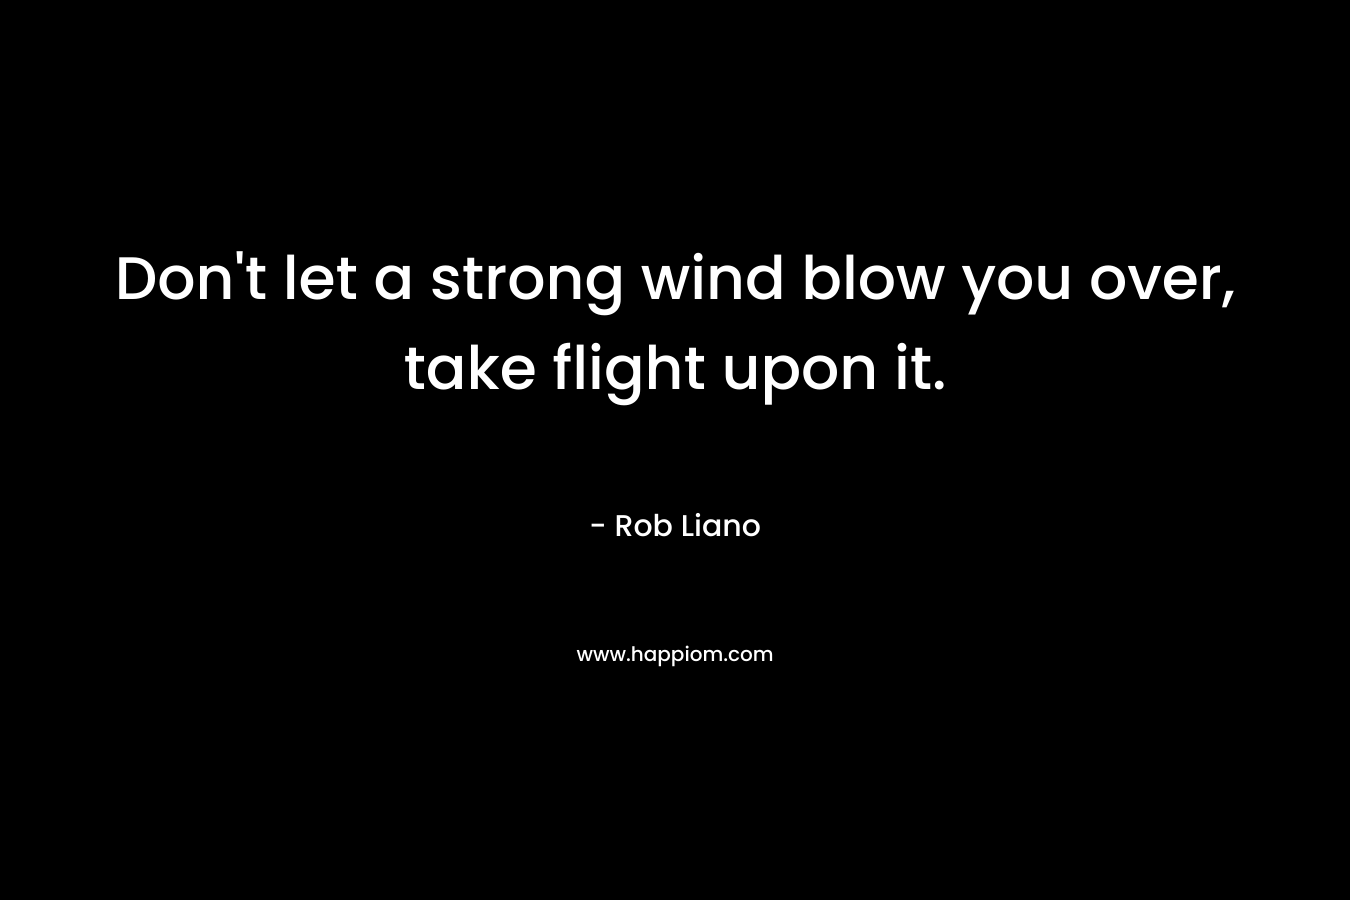 Don't let a strong wind blow you over, take flight upon it.